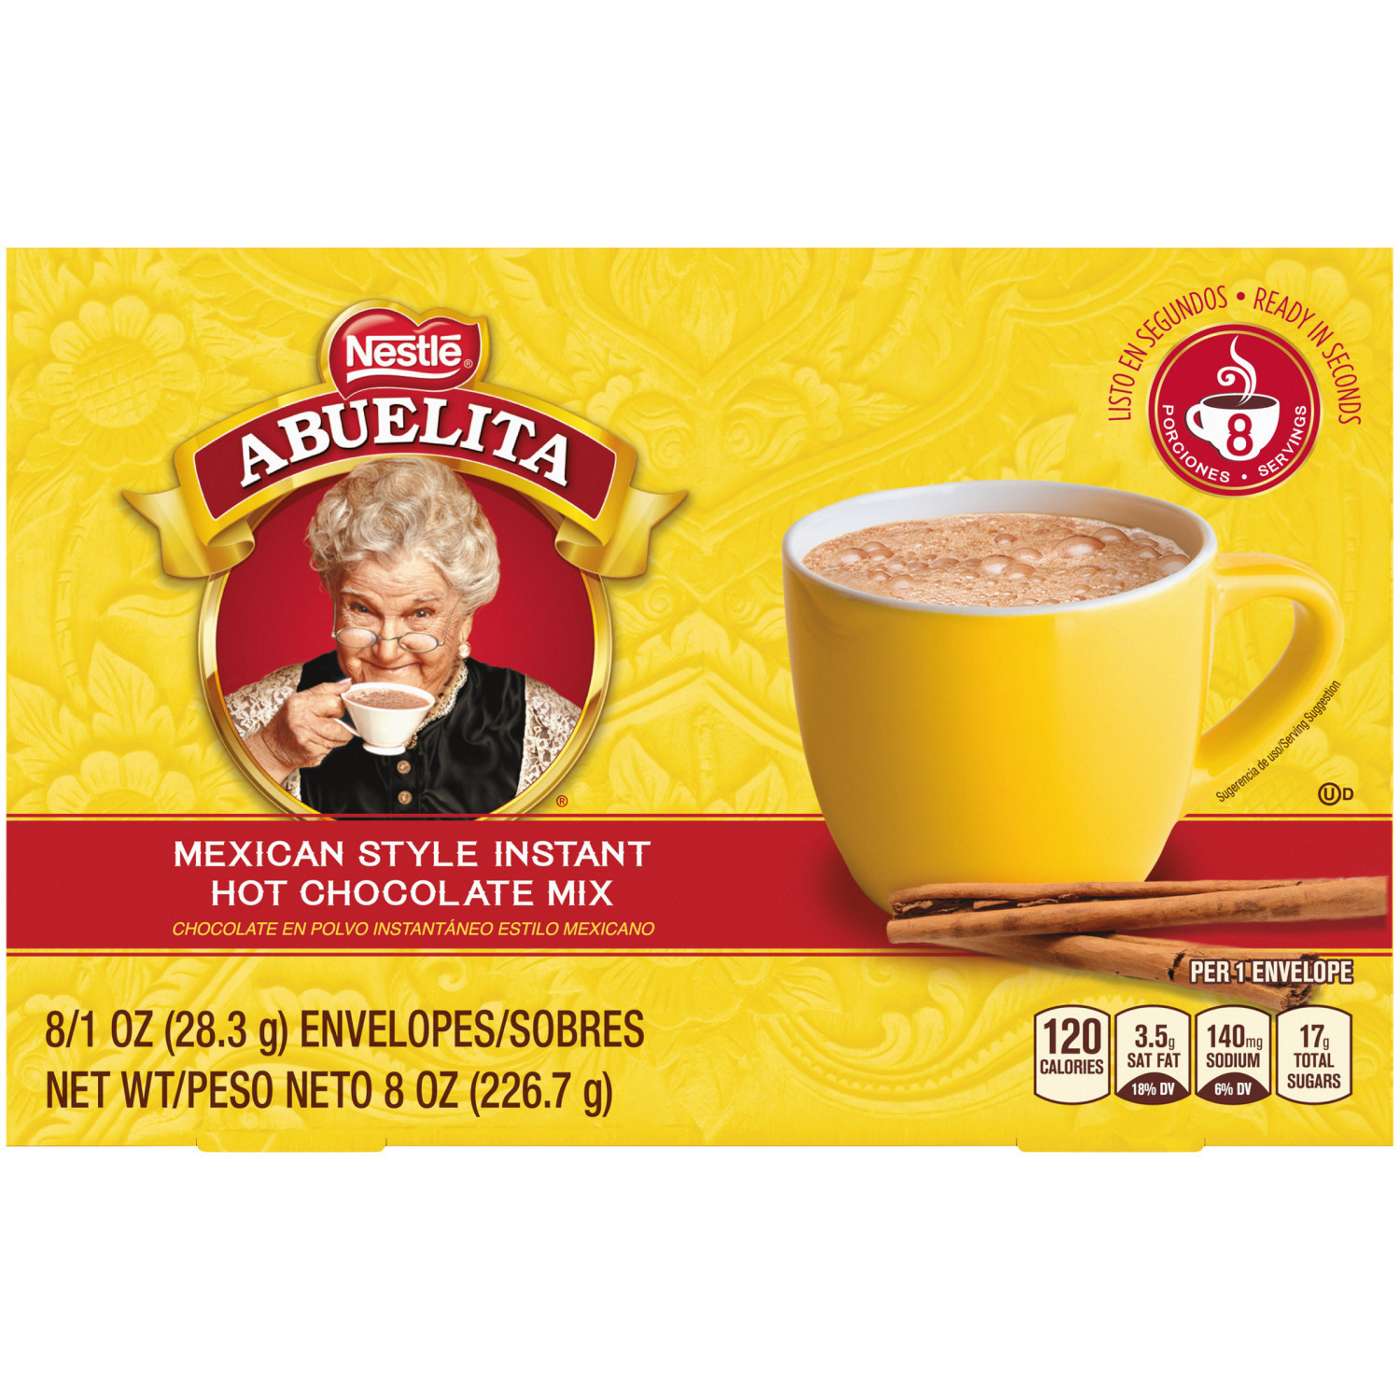 Nestle Abuelita Mexican Style Instant Hot Chocolate Drink Mix; image 1 of 8